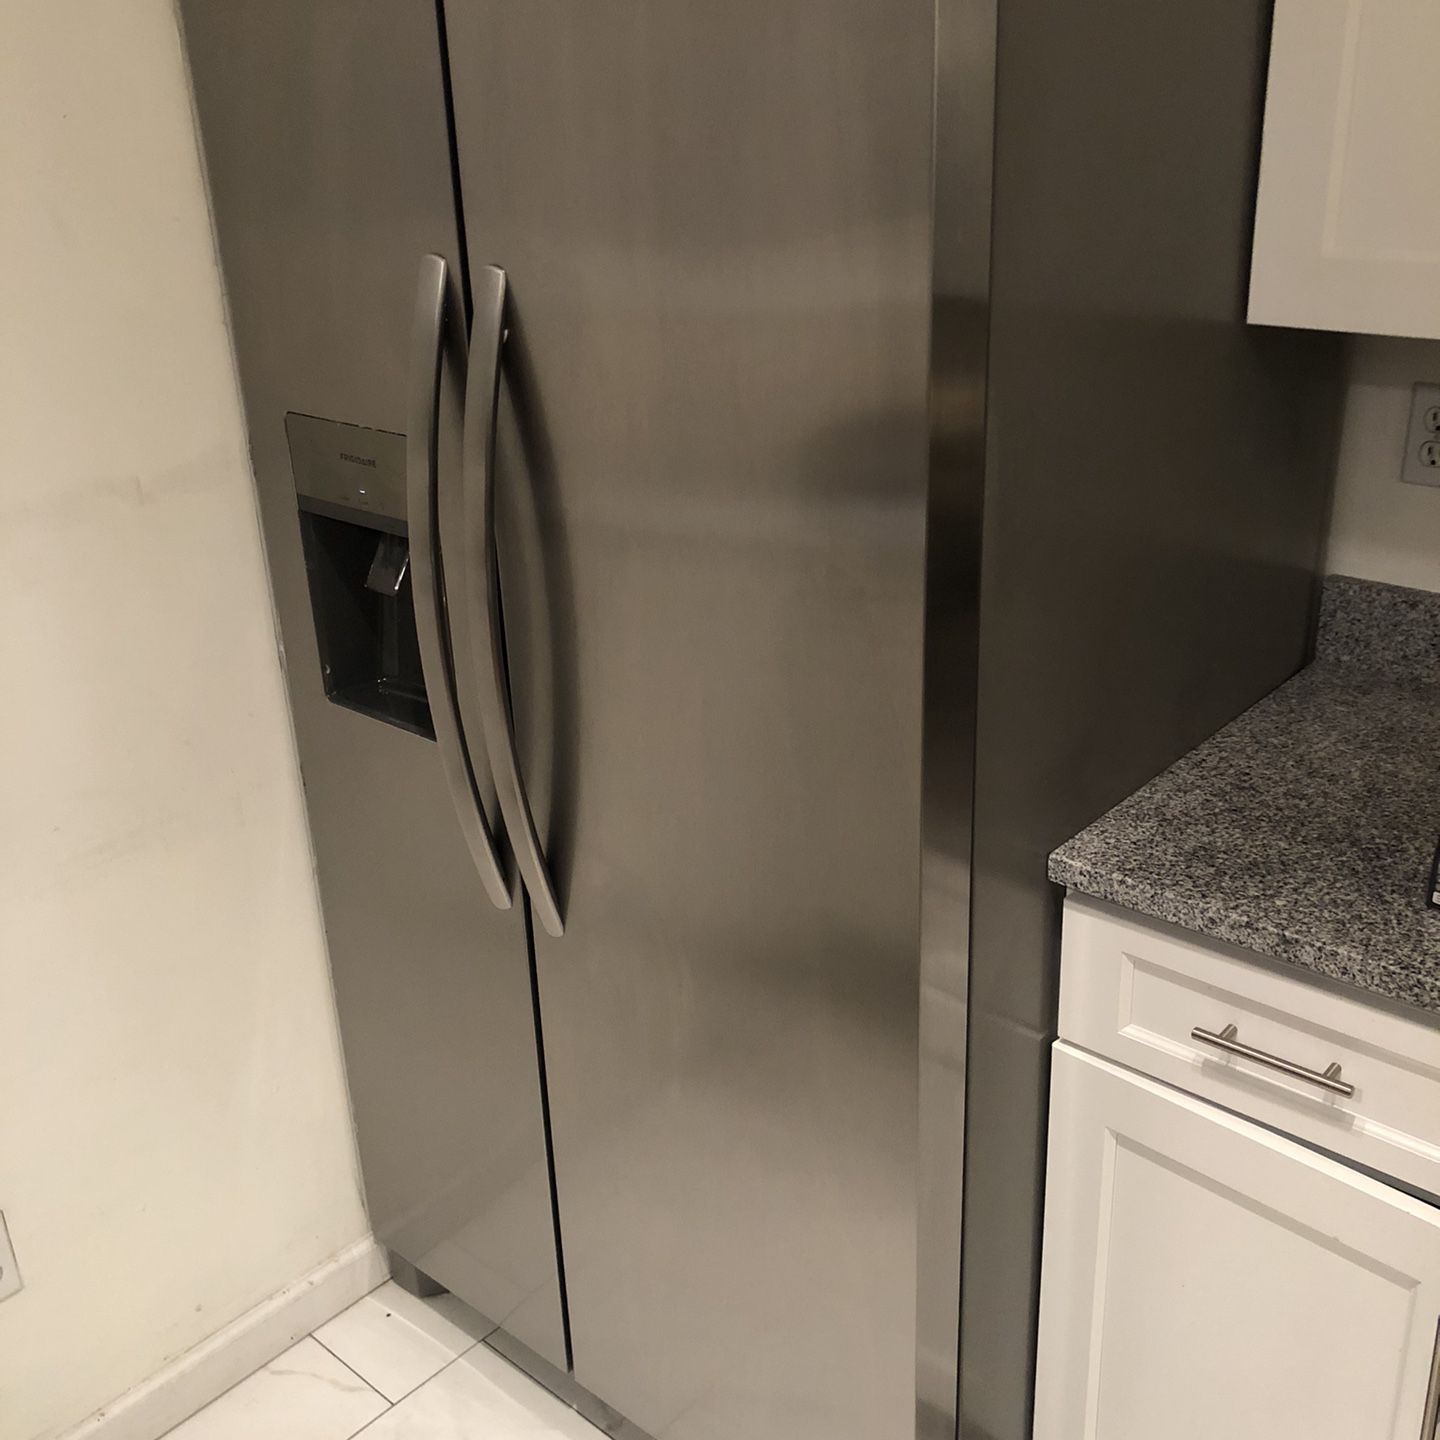 Frigidaire Side by Side Stainless Steel Refrigerator (Delivery Included)